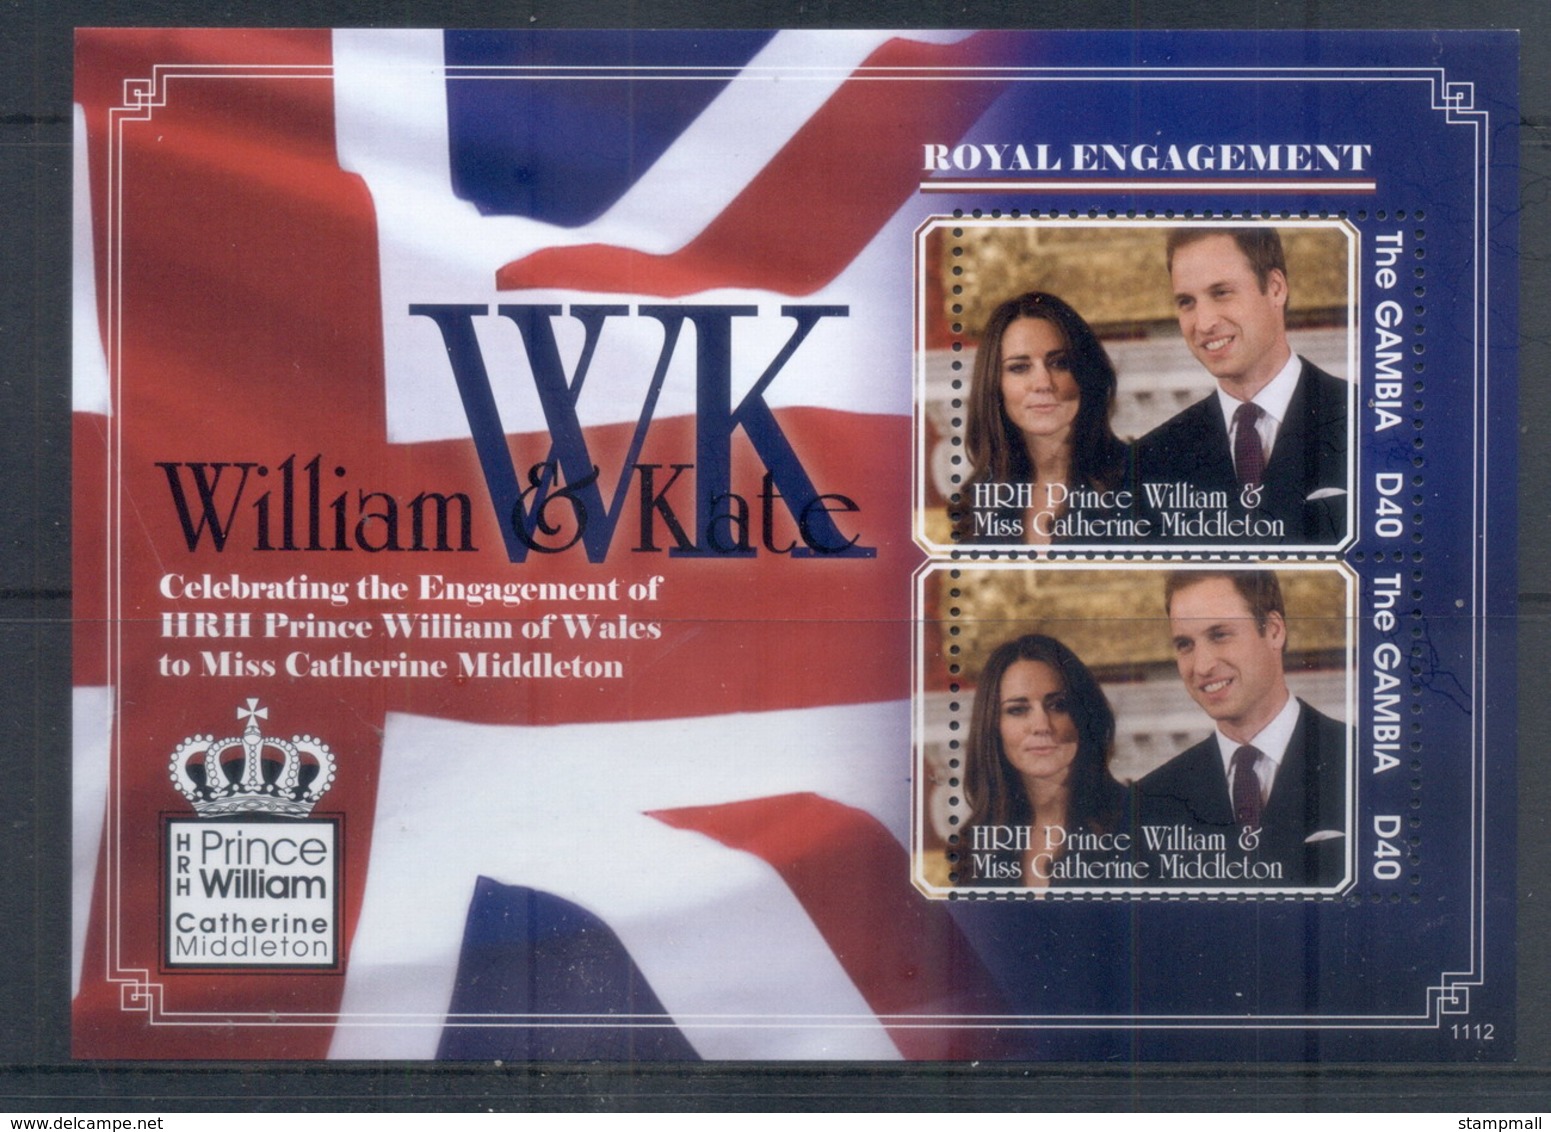 Gambia 2011 Royal Engagement William & Kate #1112 D40 MS MUH - Gambia (1965-...)